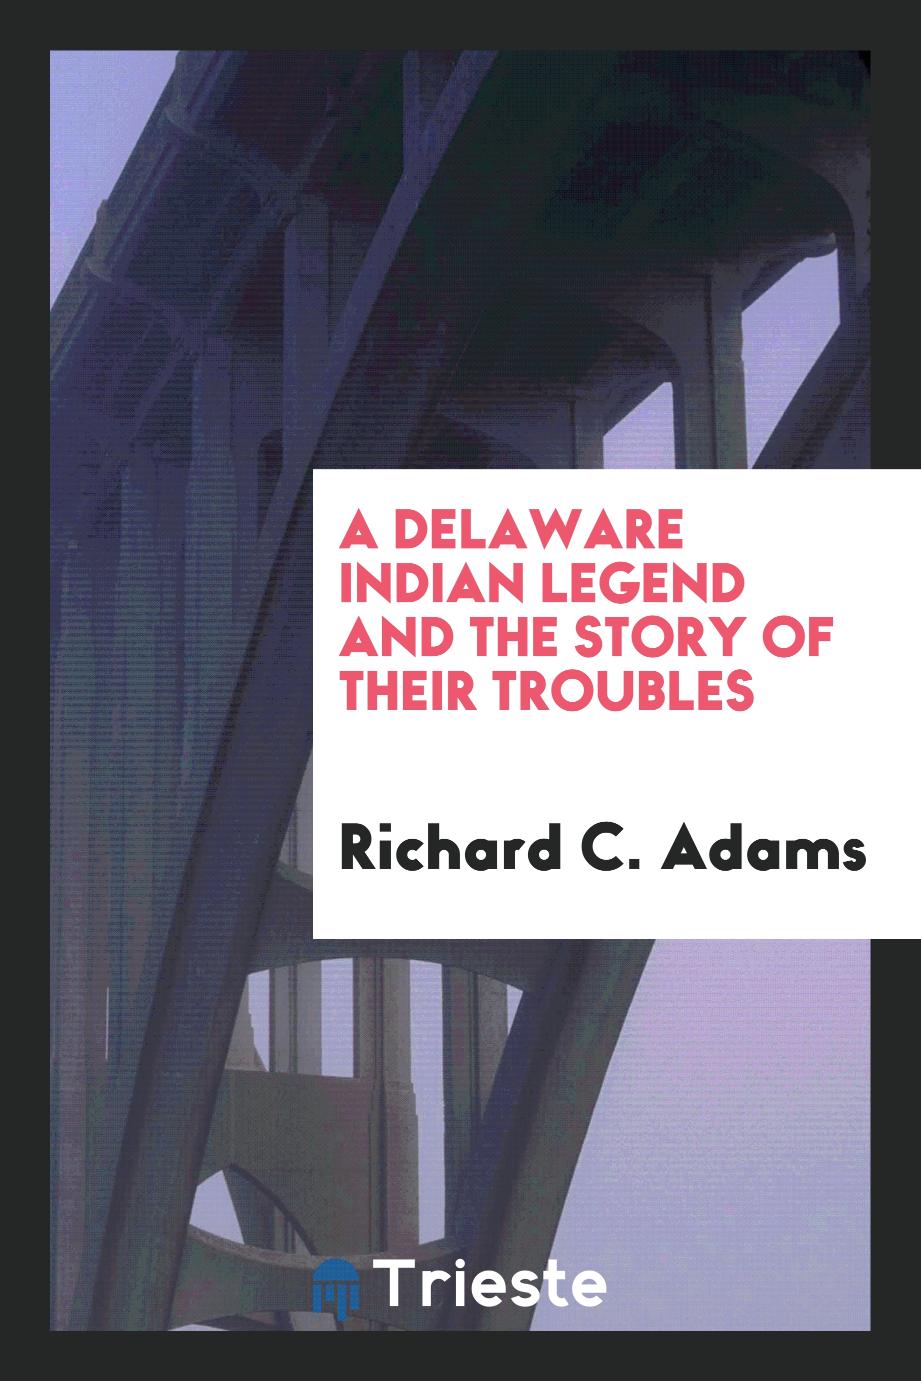 Richard C. Adams - A Delaware Indian Legend and the Story of Their Troubles